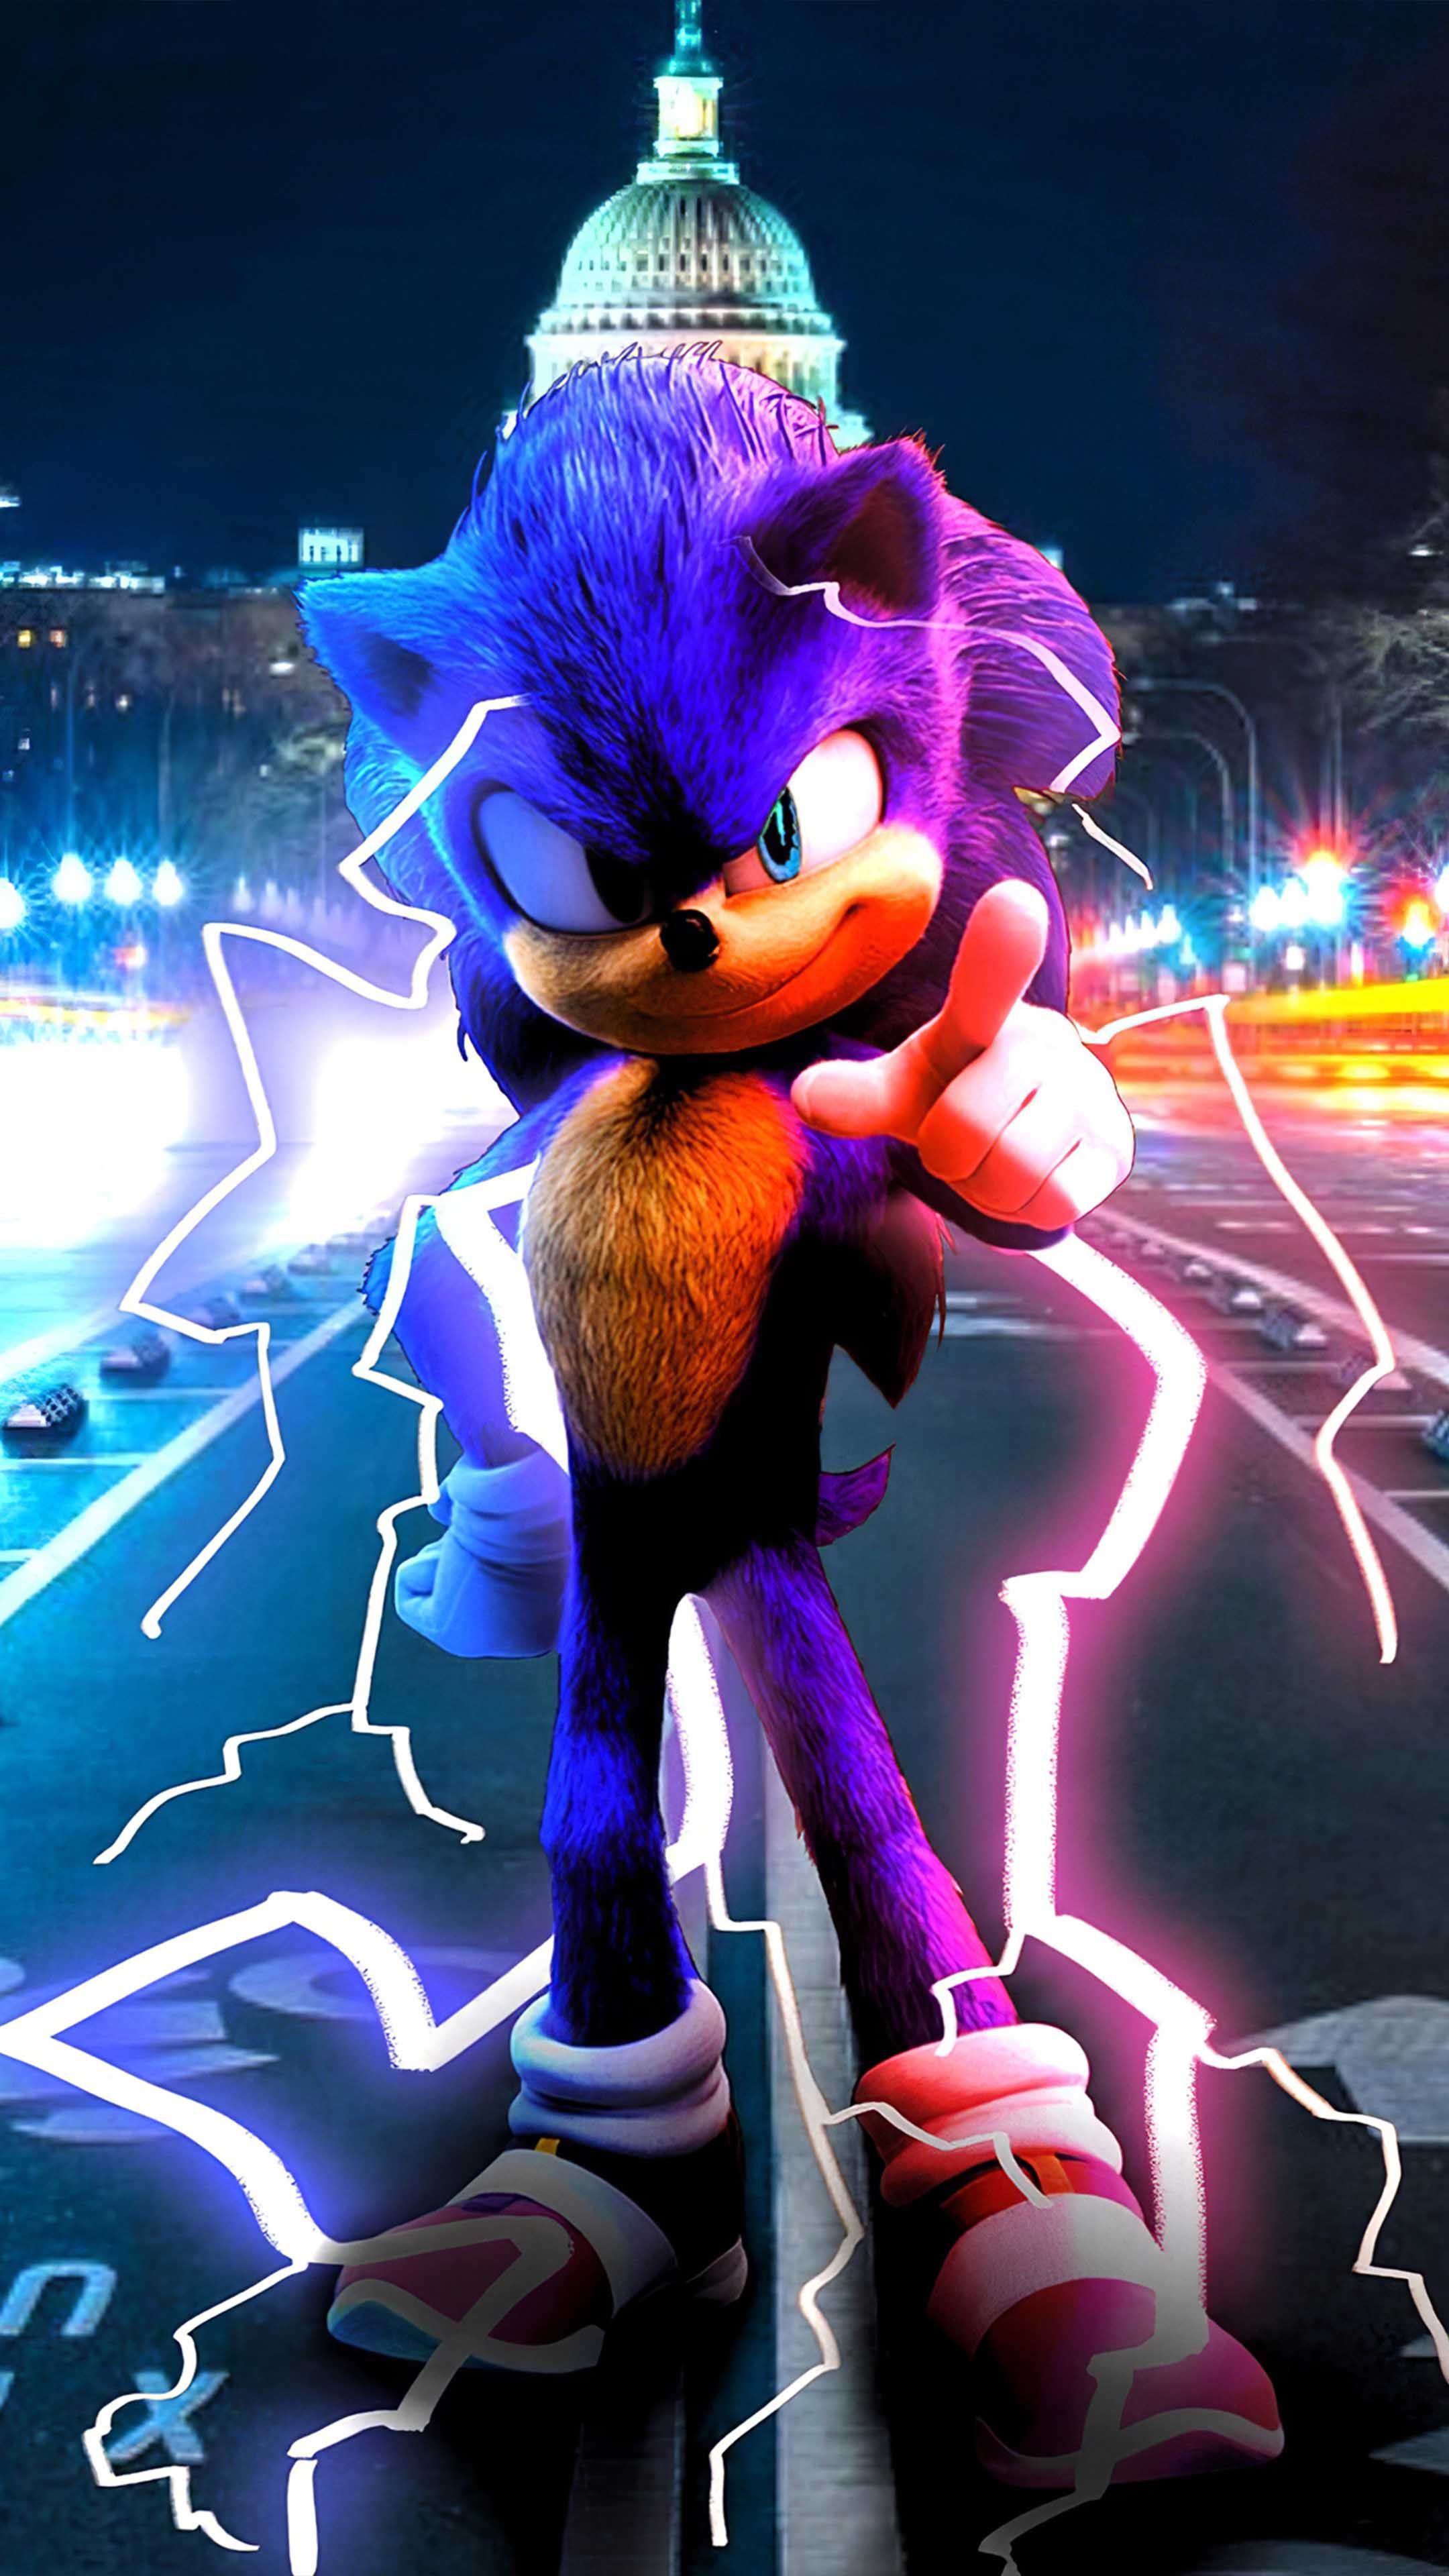 Sonic The Hedgehog Poster 2020 4K Ultra HD Mobile Wallpaper. Sonic the movie, Hedgehog movie, Sonic